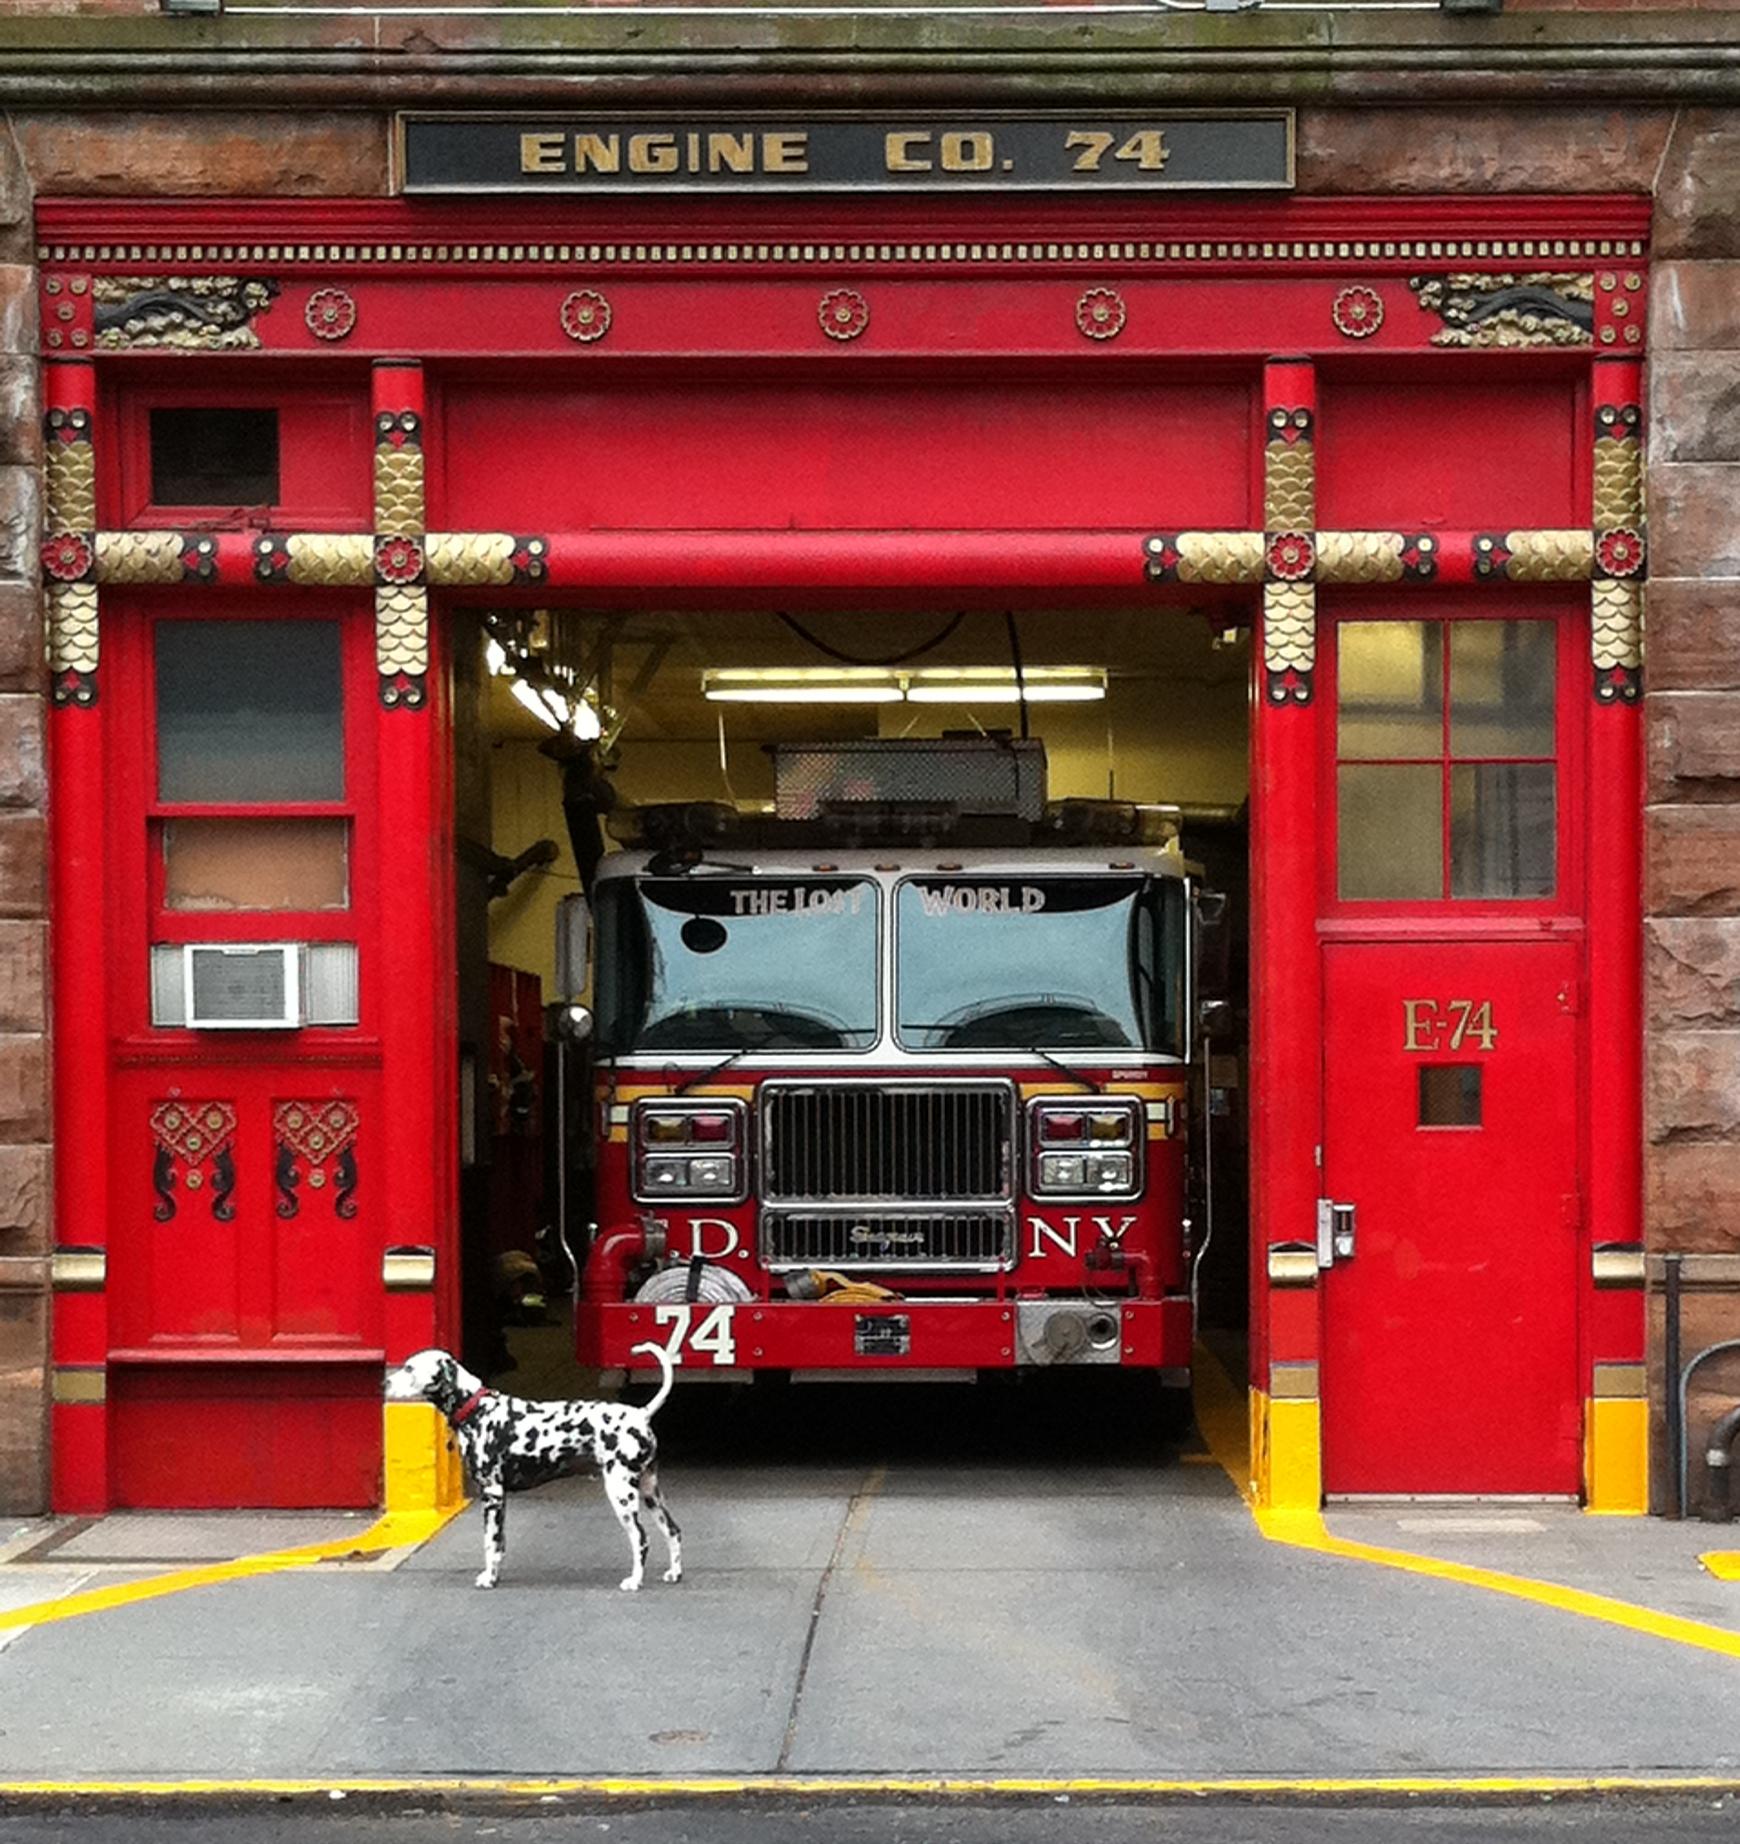 How did that spotty black and white dog known as a dalmatian come to be associated with fire fighting?